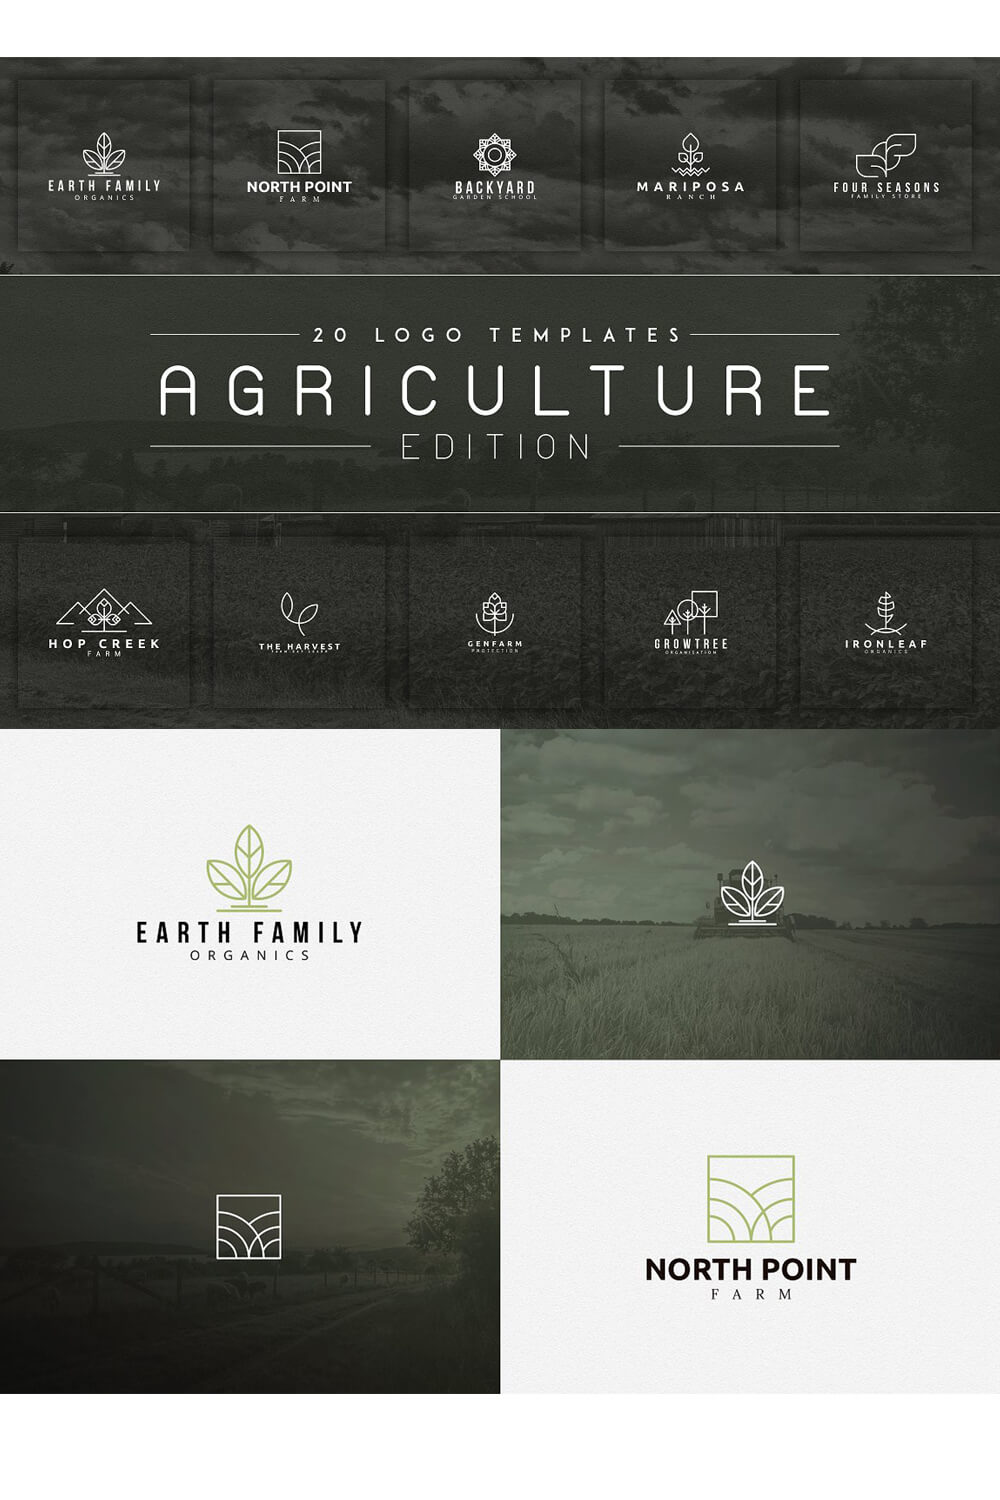 A large Agriculture logo at the top of the picture and two versions of two logos each at the bottom of the picture.